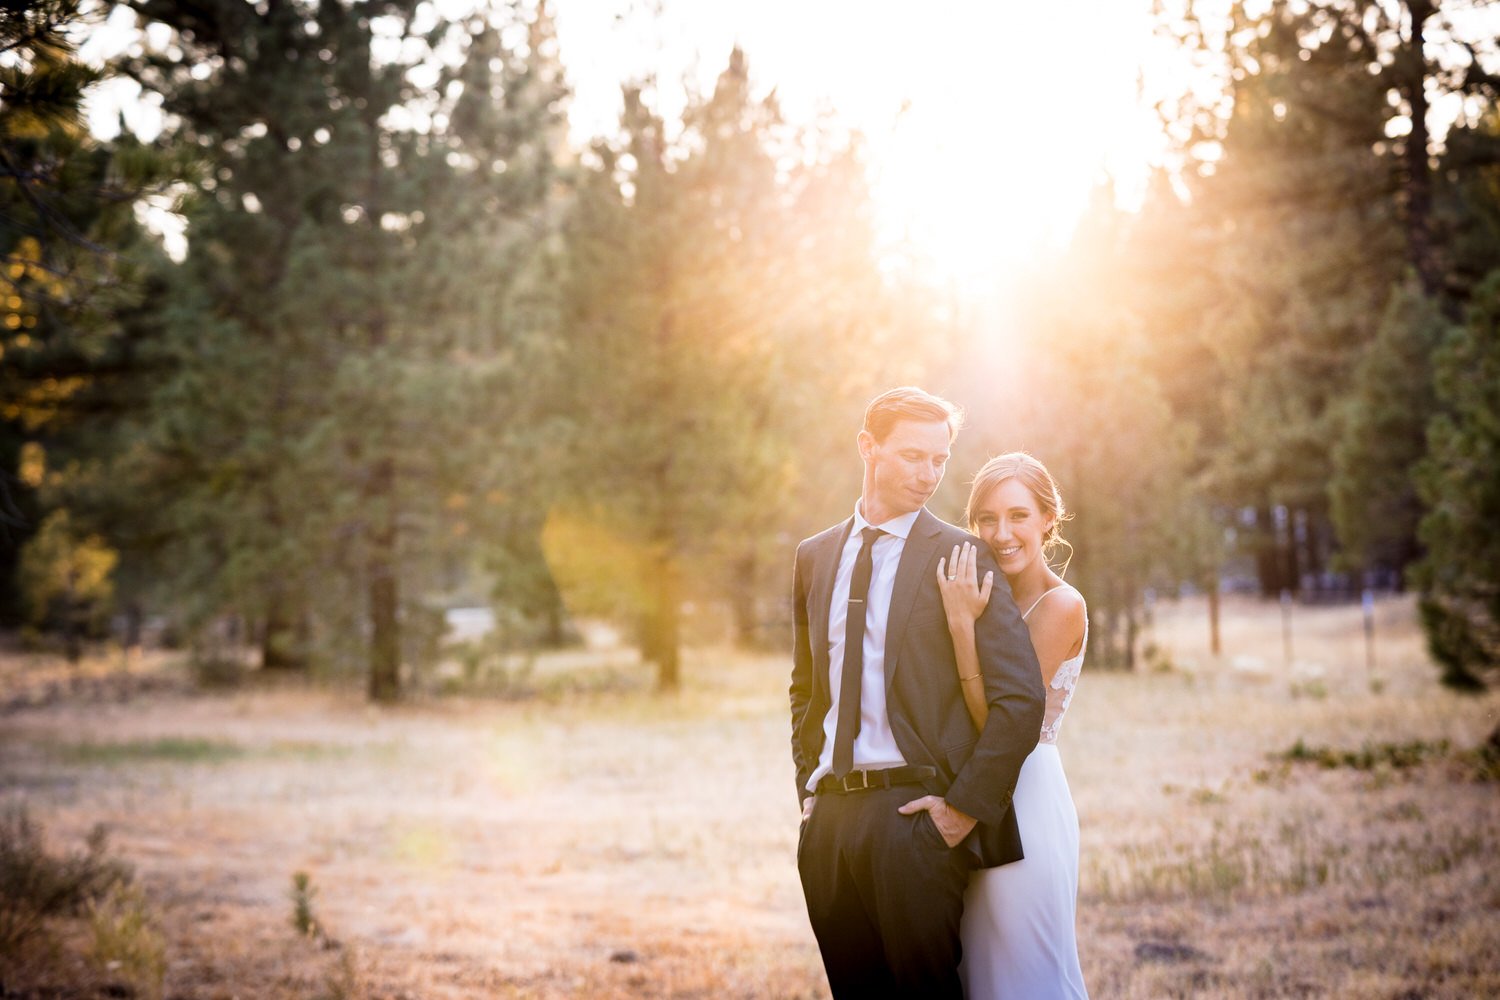 The sun sets behind a bride and groom in a grassy meadow.